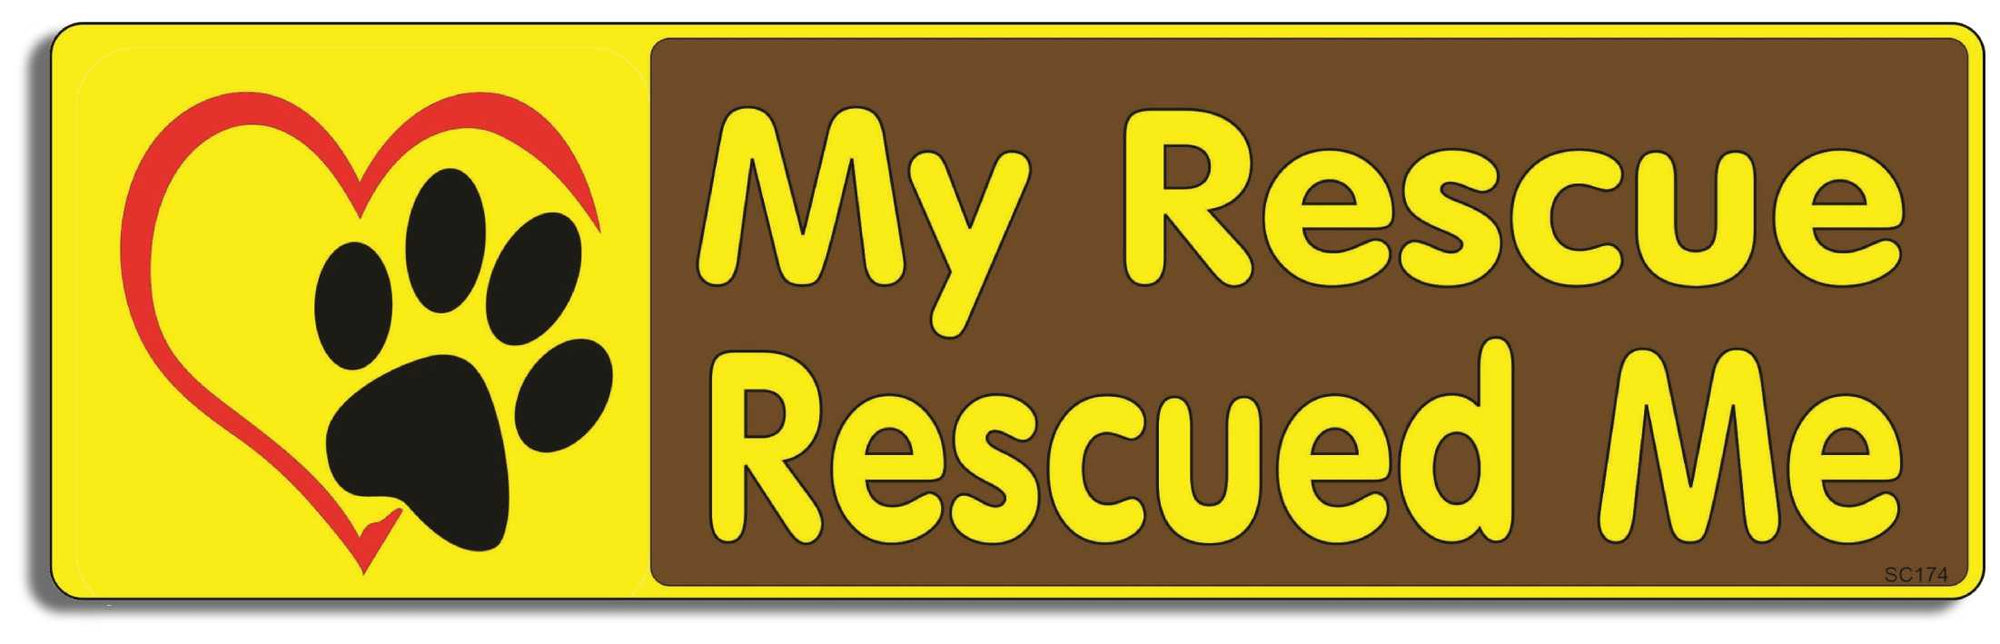 My Rescue Rescued Me - 3" x 10" -  Decal Bumper Sticker-political Bumper Sticker Car Magnet My Rescue Rescued Me-  Decal for carsanimal rights, animals, Dogs, pets